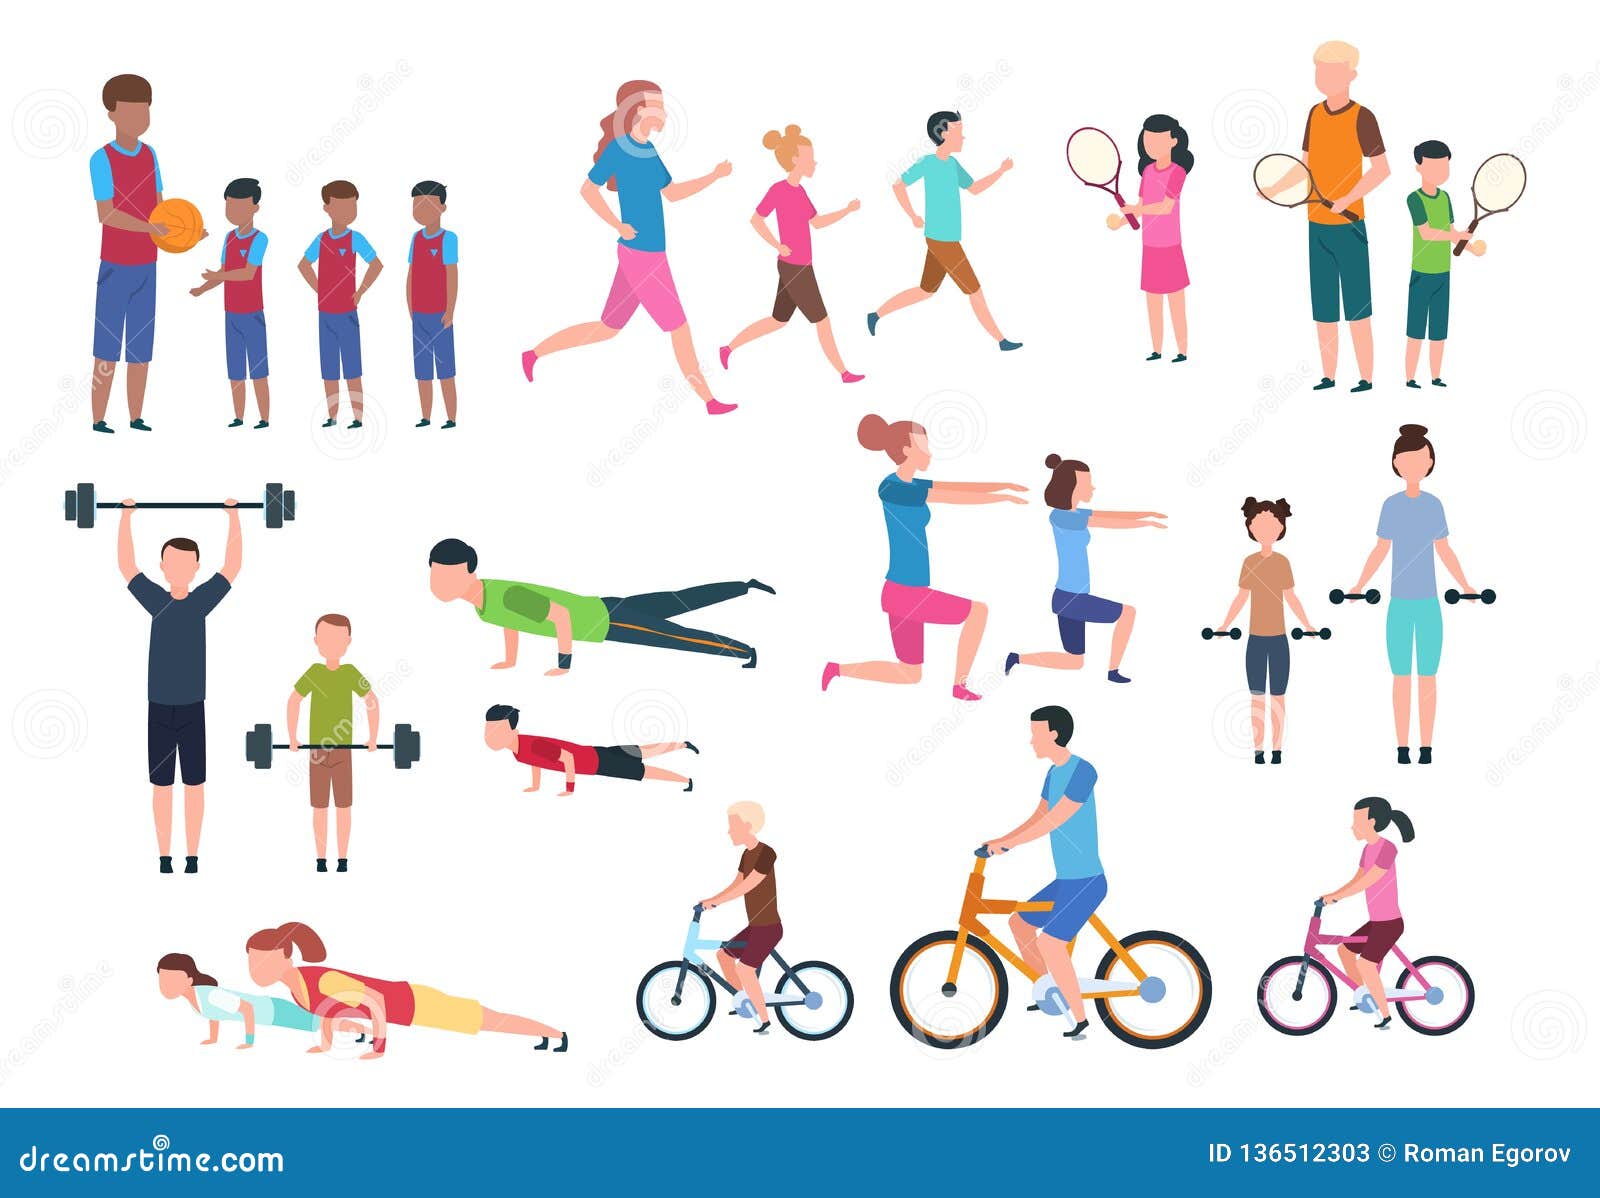 family playing sports. people fitness exercising and jogging. sport active lifestyles cartoon characters 